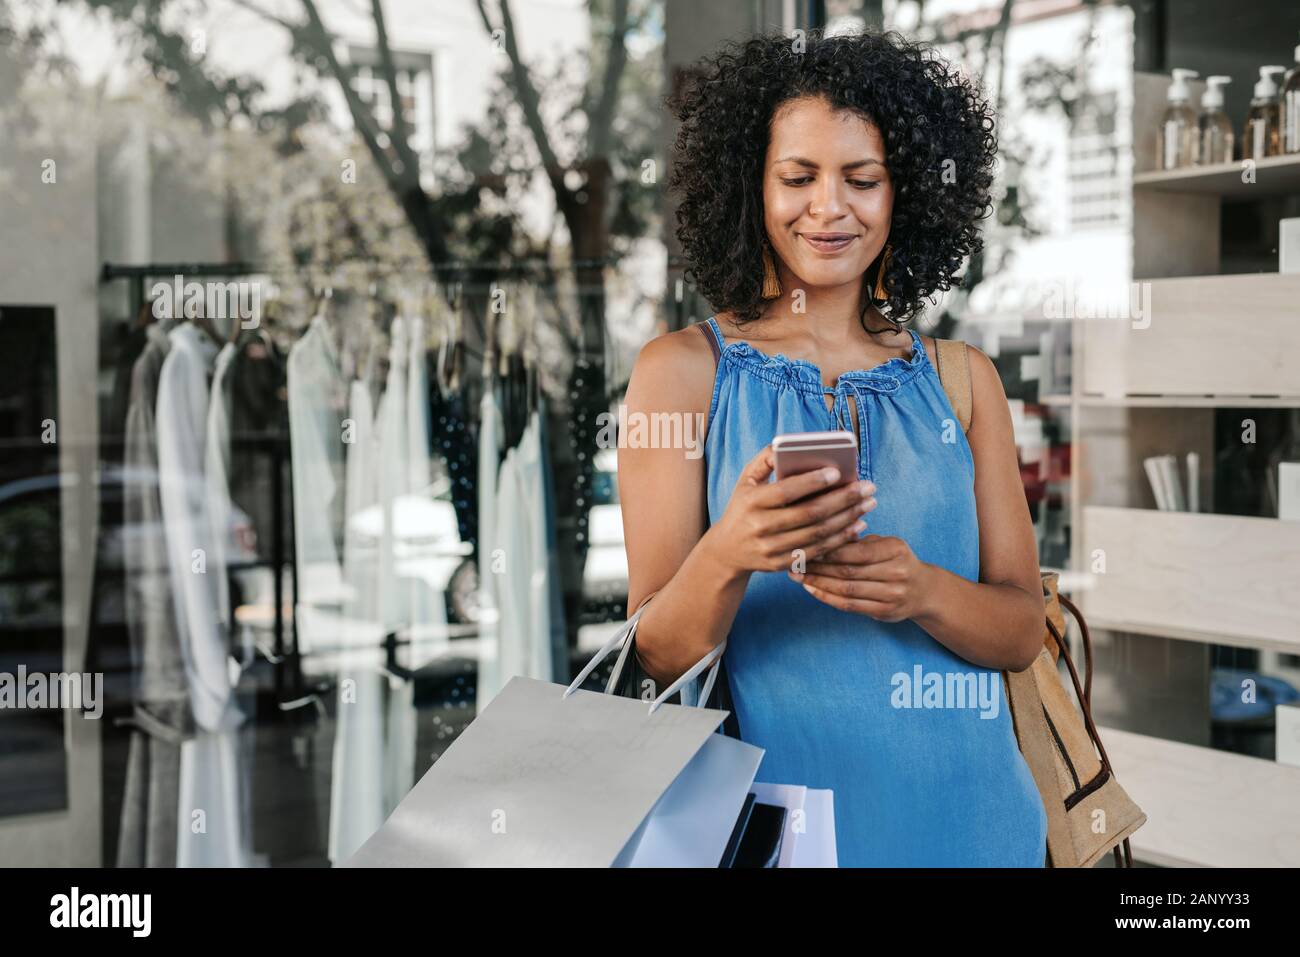 Smiling young woman reading a text message while out shopping Stock Photo